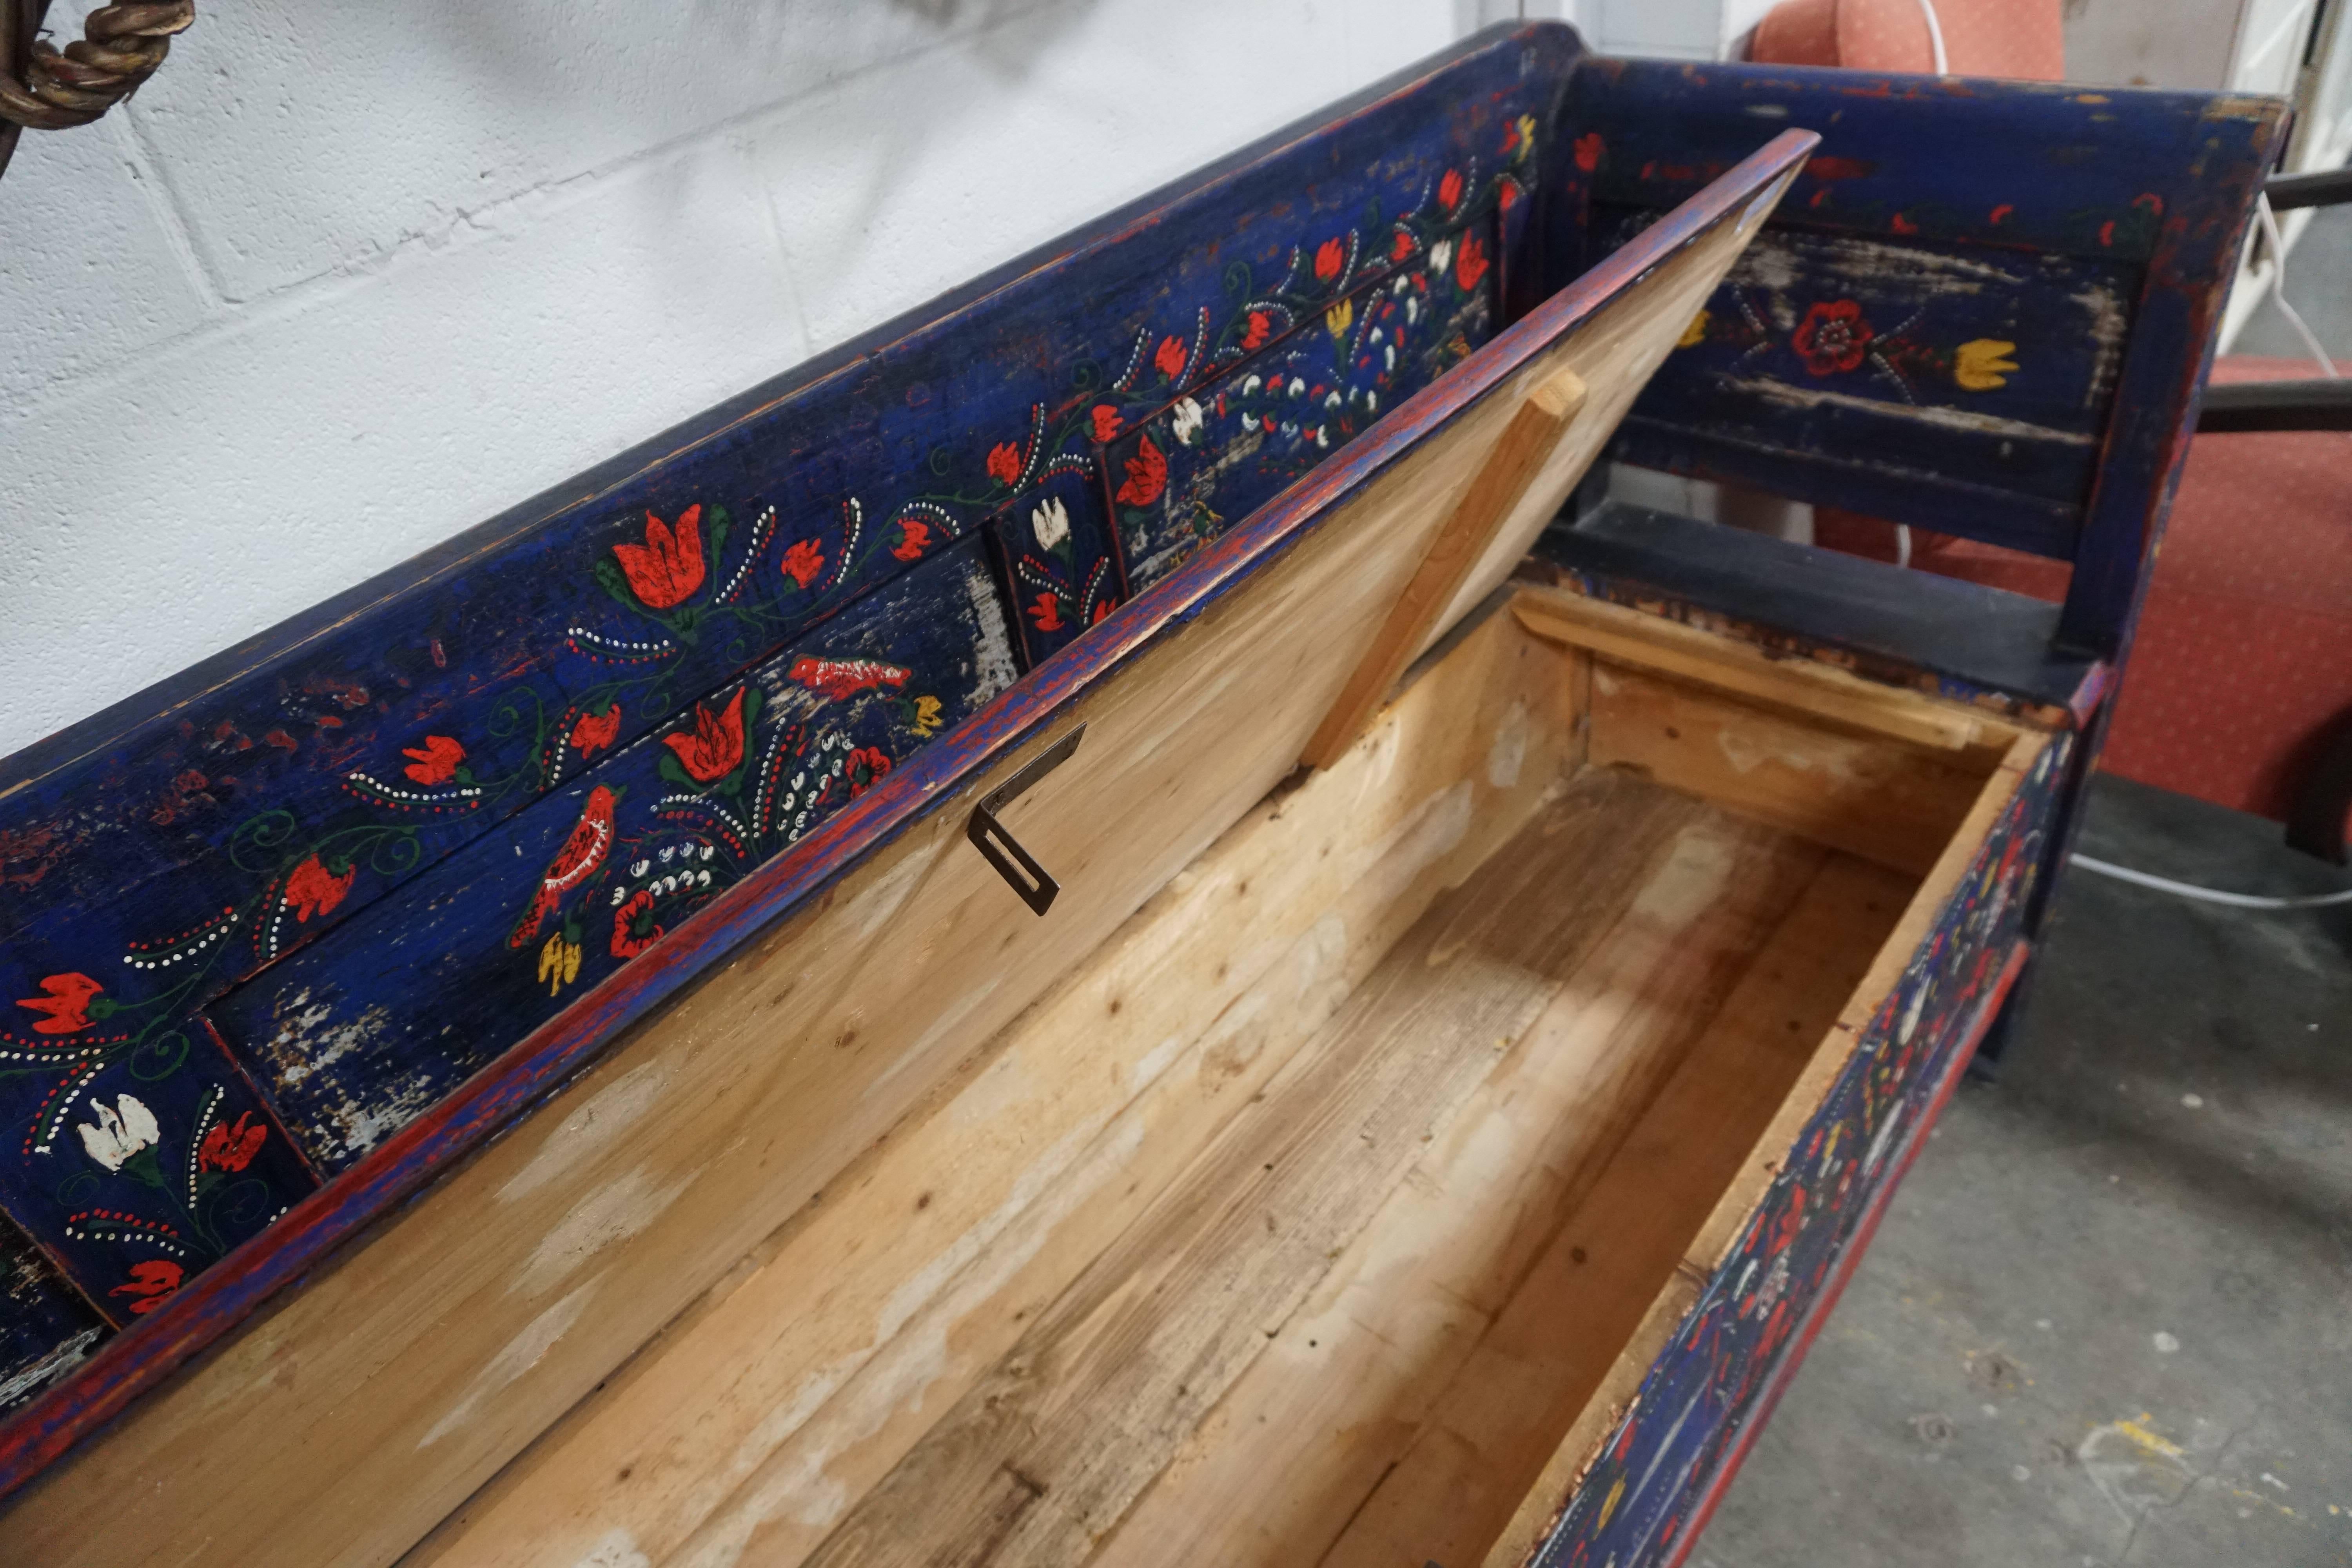 Beautiful hand-painted pine bench from late 19th century Scandinavia. Seat is hinged, providing ample hidden storage beneath. Designs feature hand-painted tulips and wildflowers.